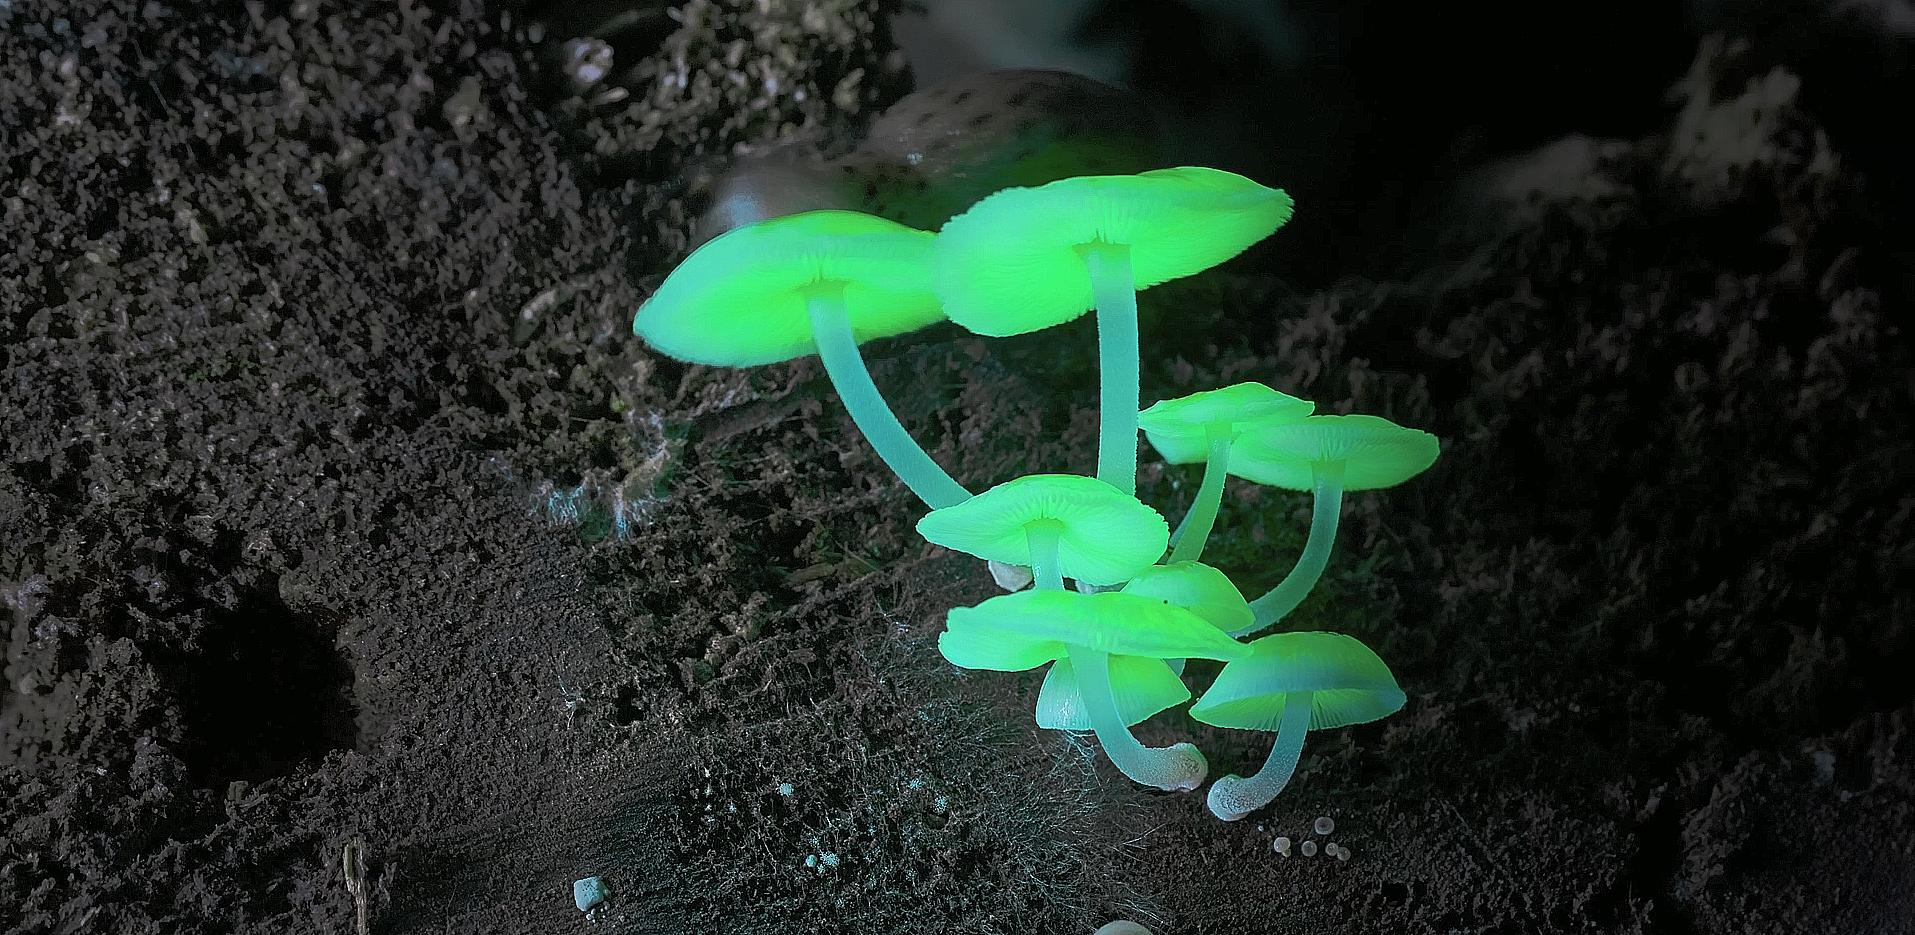 The Hong Kong Space Museum will launch a new dome show, "Nature's Hidden Kingdom", at its Space Theatre tomorrow (January 13). Picture shows one species of glowing mushrooms which can attract insects at night to help spread their spores.